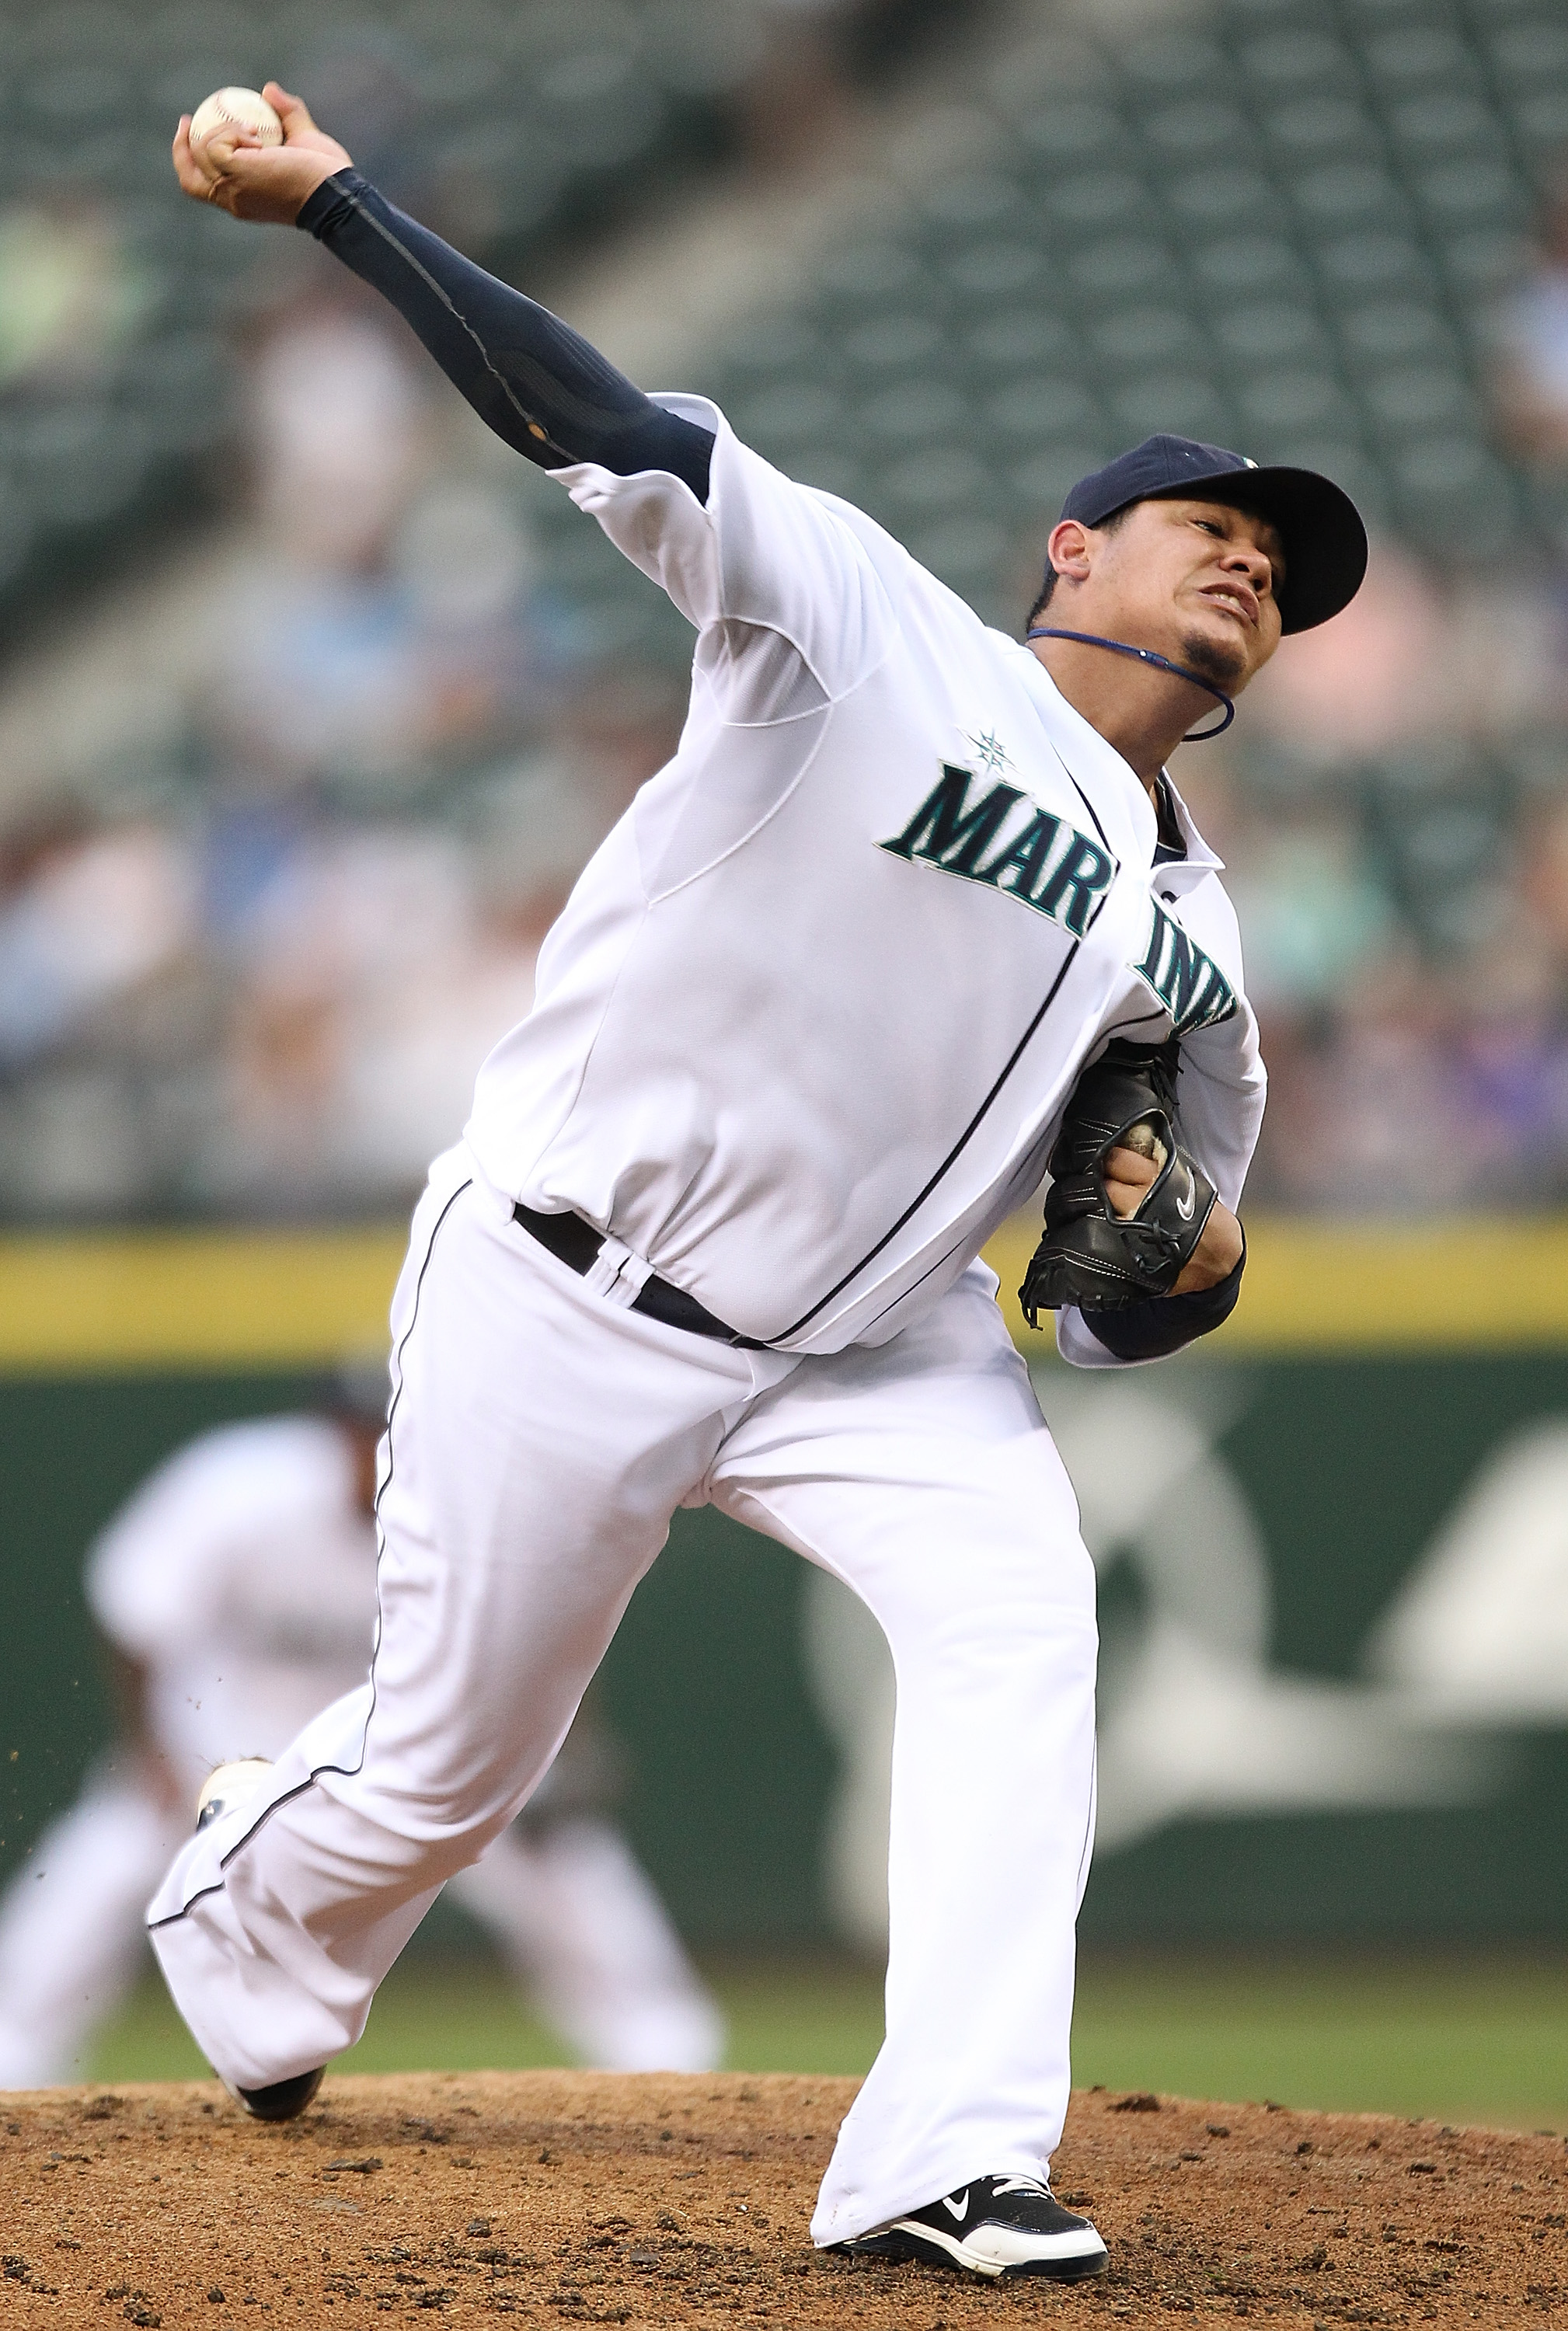 SEATTLE - AUGUST 05:  Starting pitcher Felix Hernandez #34 of the Seattle Mariners pitches against the Texas Rangers at Safeco Field on August 5, 2010 in Seattle, Washington. (Photo by Otto Greule Jr/Getty Images)